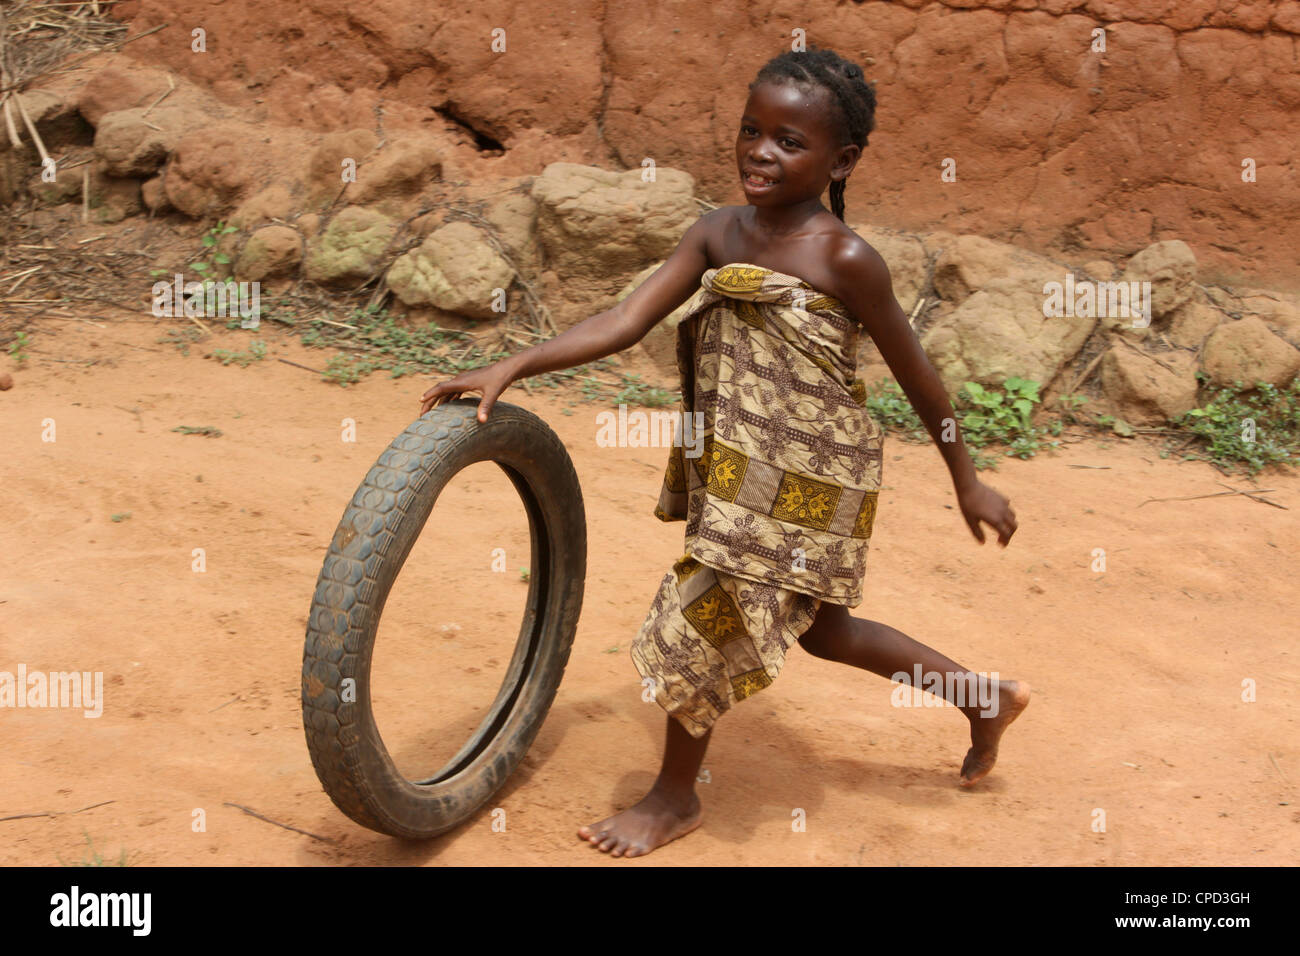 Child playing with a tyre, Tori, Benin, West Africa, Africa Stock Photo